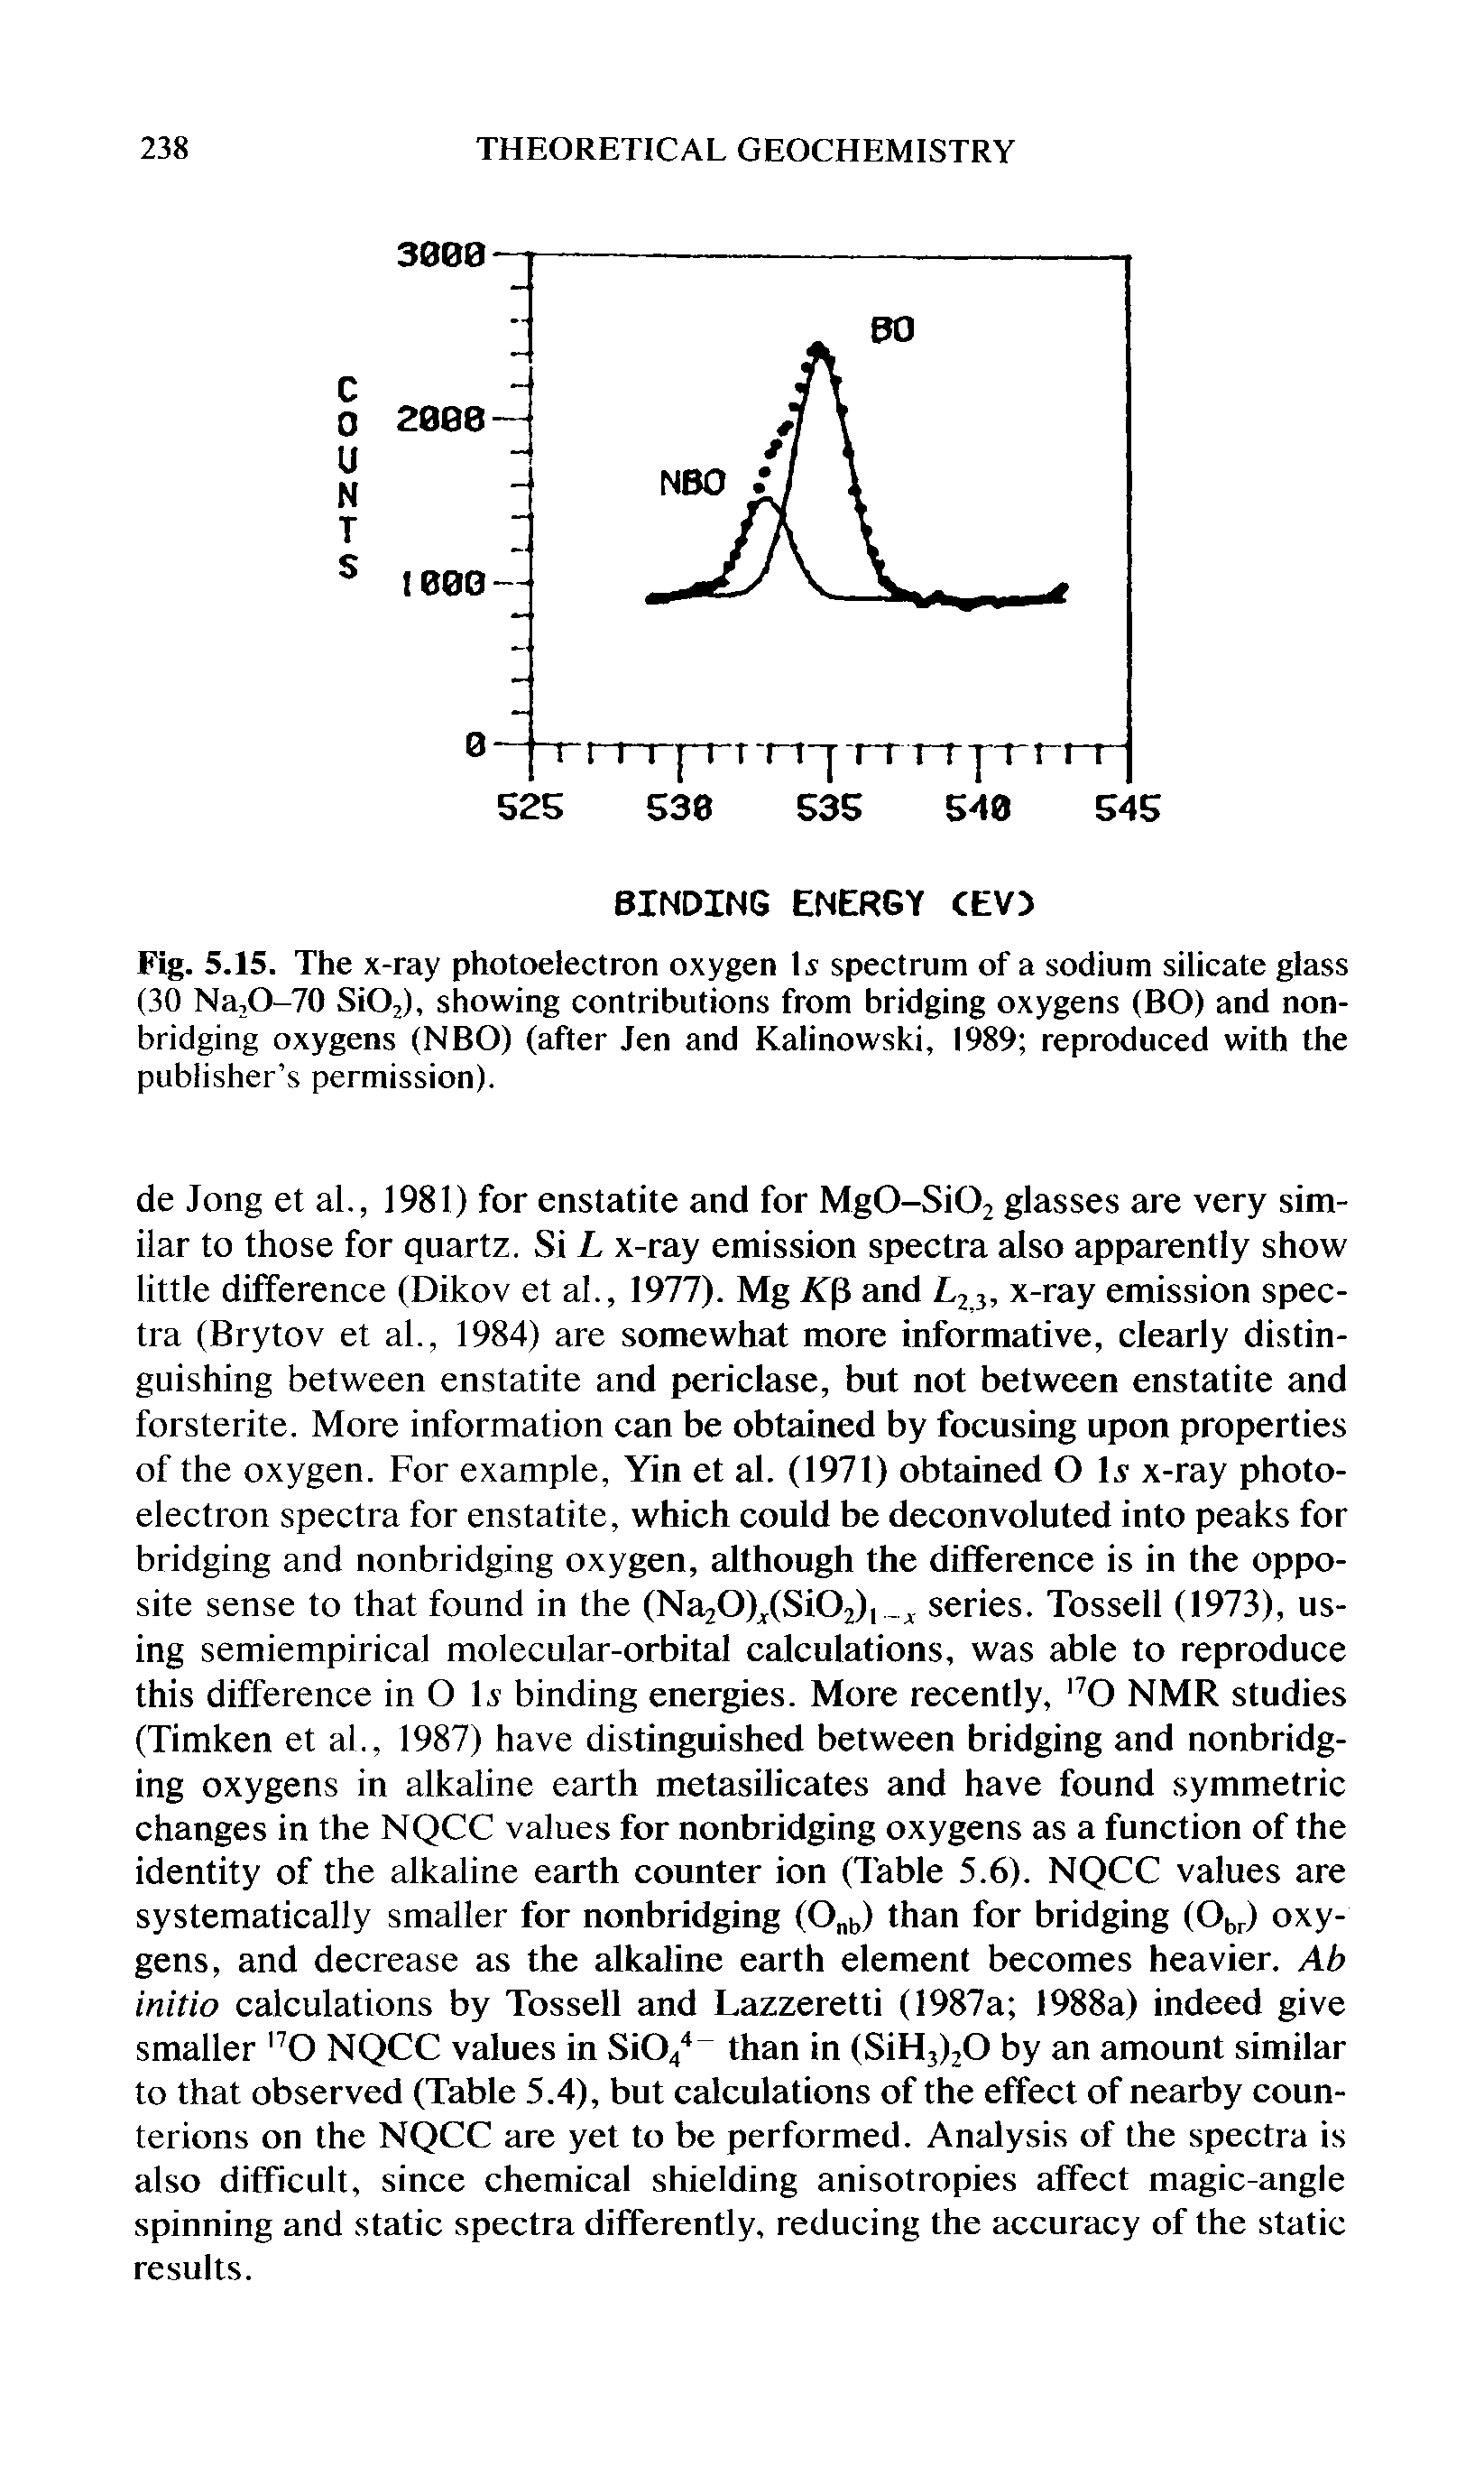 Fig. 5.15. The x-ray photoelectron oxygen Is spectrum of a sodium silicate glass (30 Na,O-70 SiO,), showing contributions from bridging oxygens (BO) and nonbridging oxygens (NBO) (after Jen and Kalinowski, 1989 reproduced with the publisher s permission).